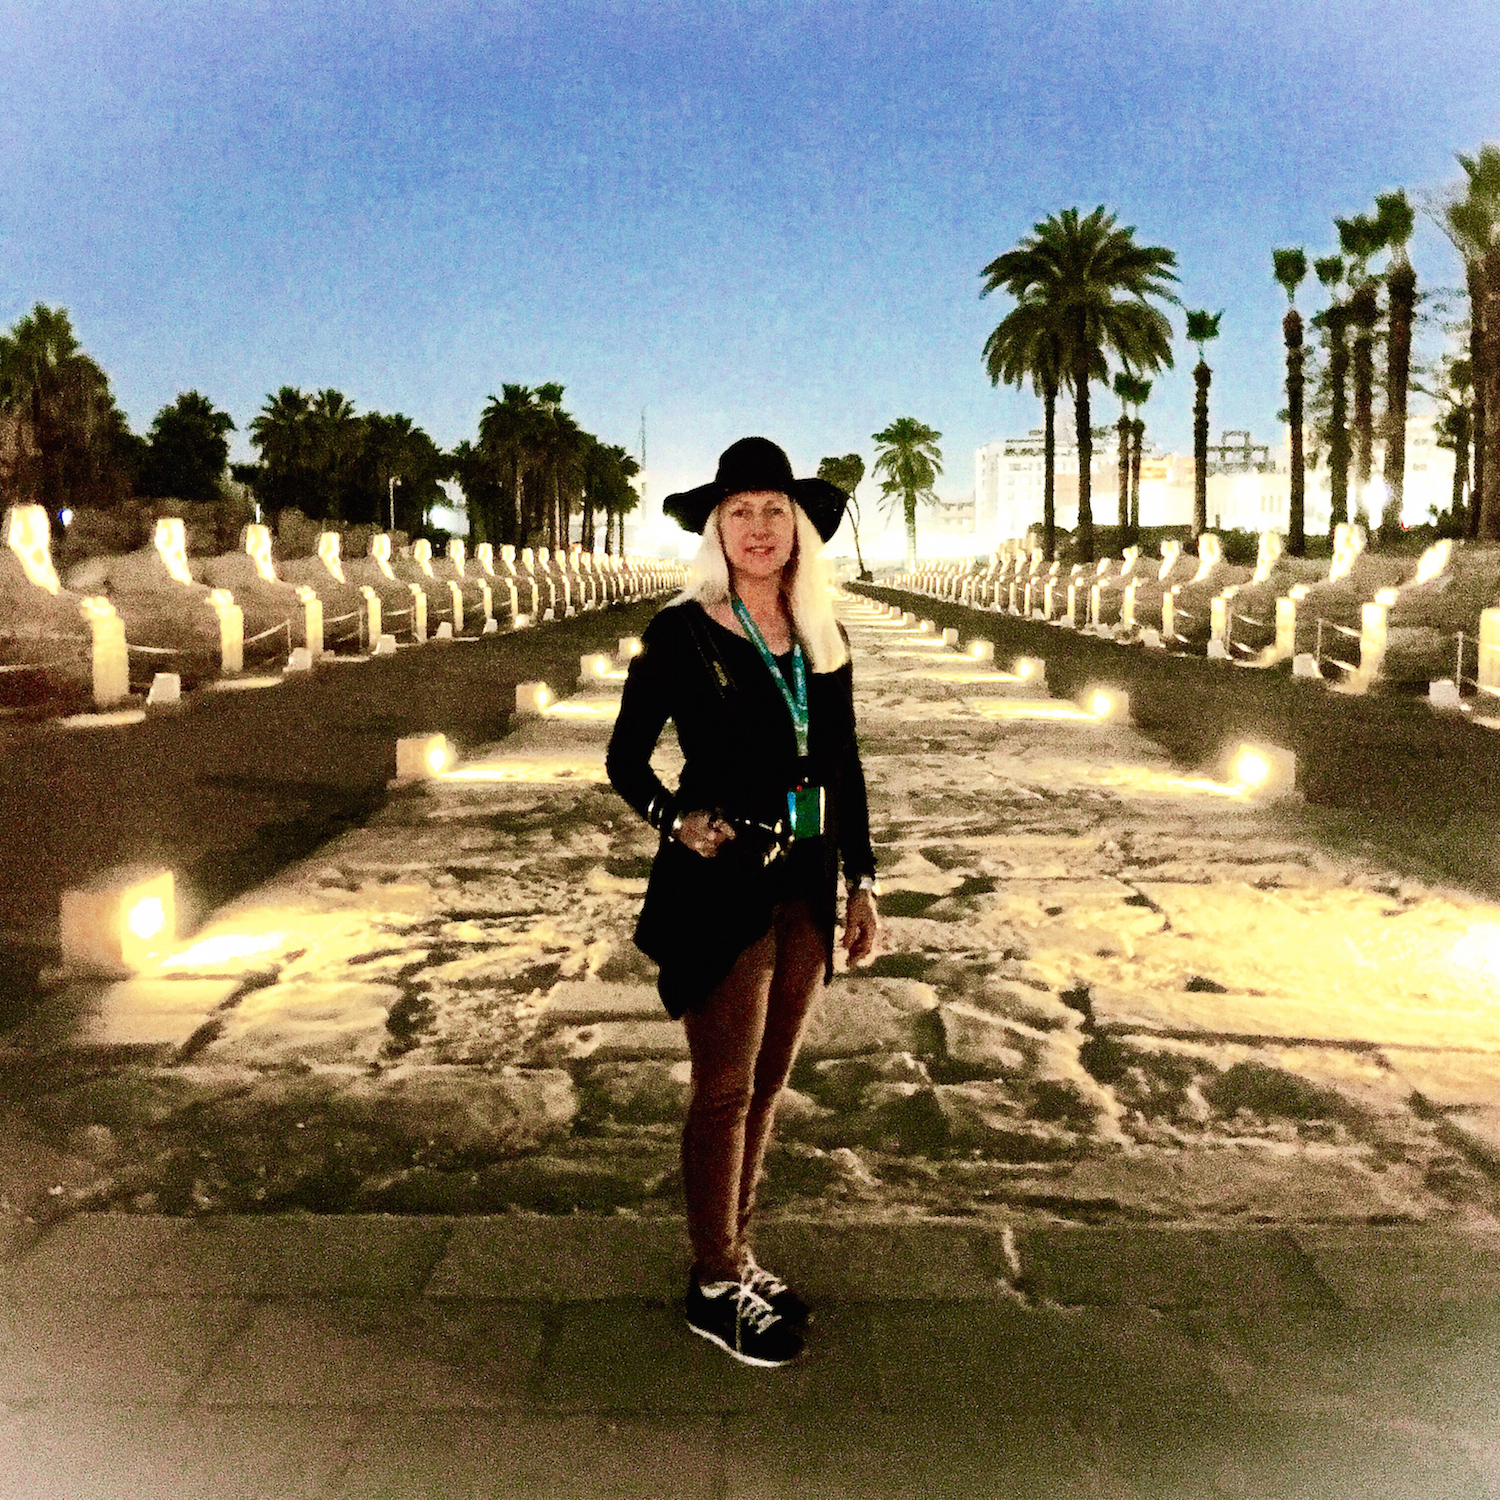 At the Avenue of the Sphinxes in Luxor, Egypt.